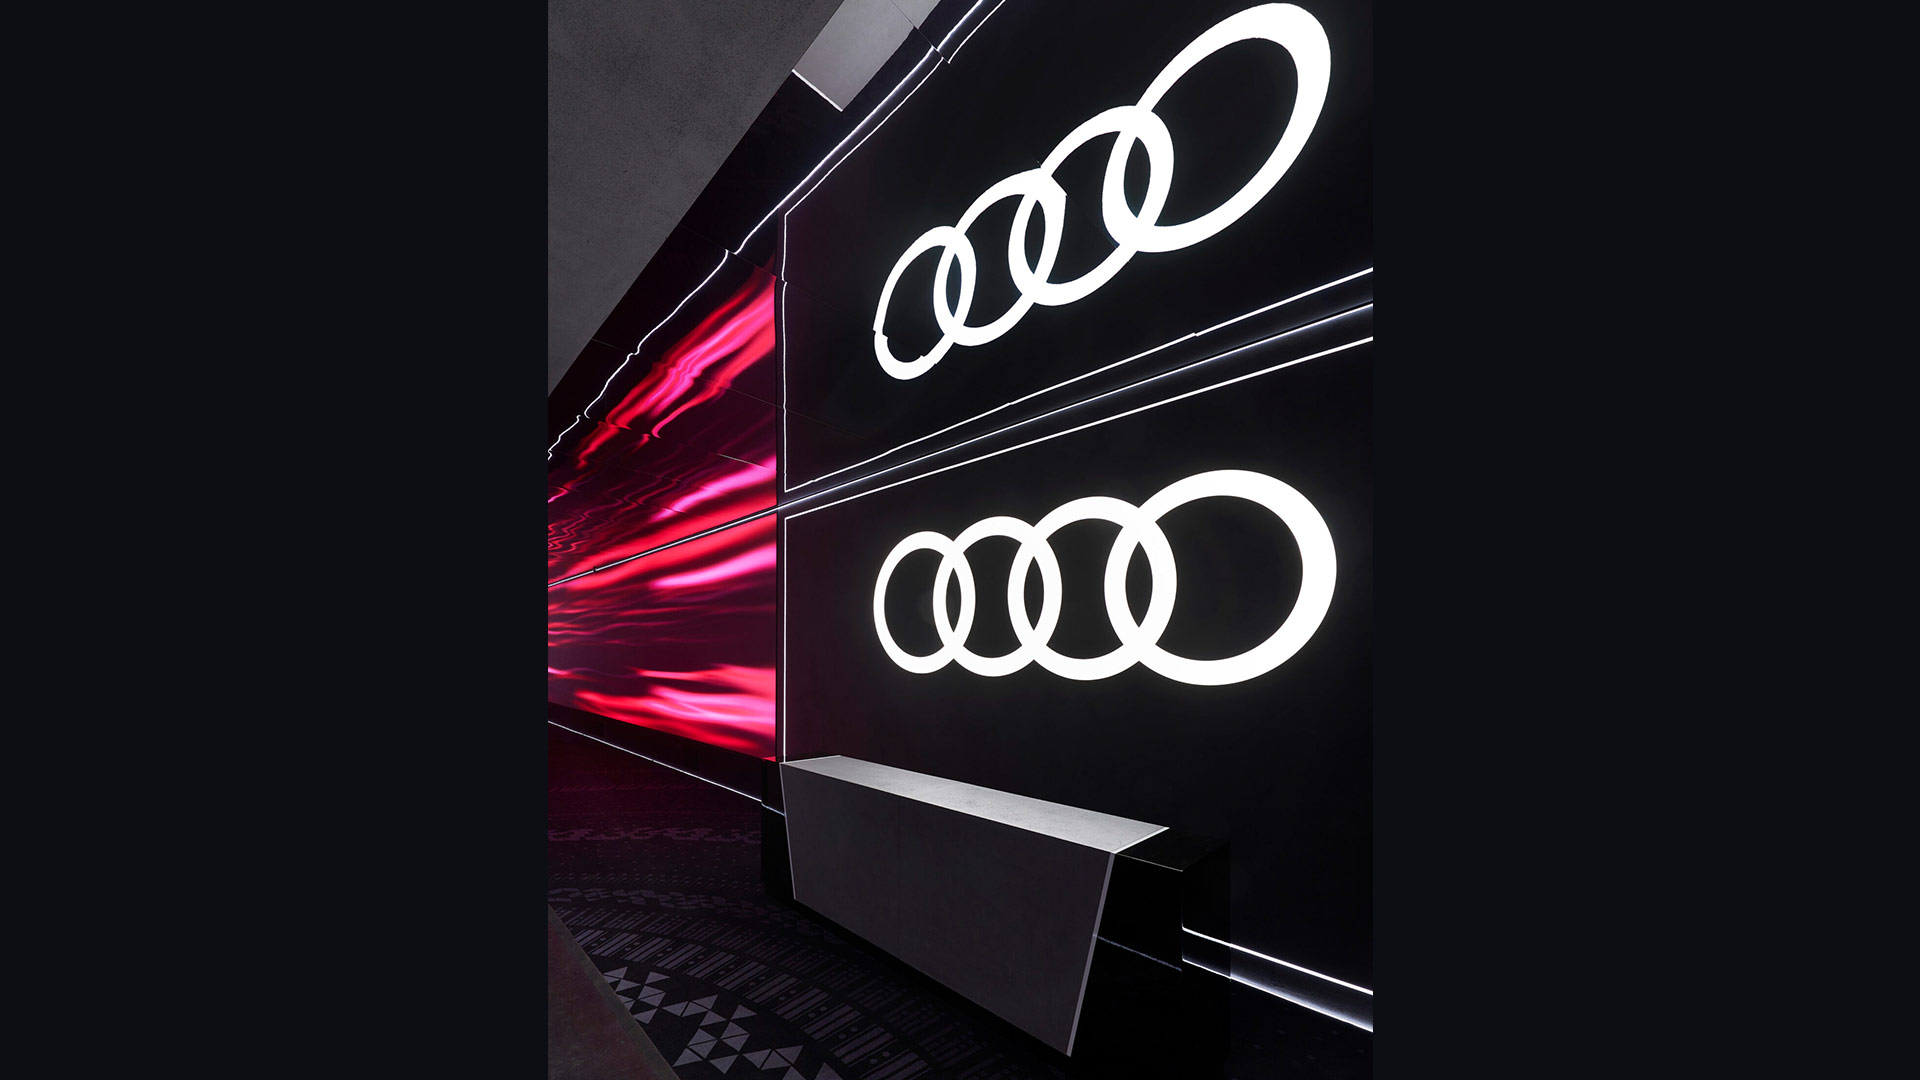 Marcel Wanders studio experiments with conceptual design for Audi City Lab